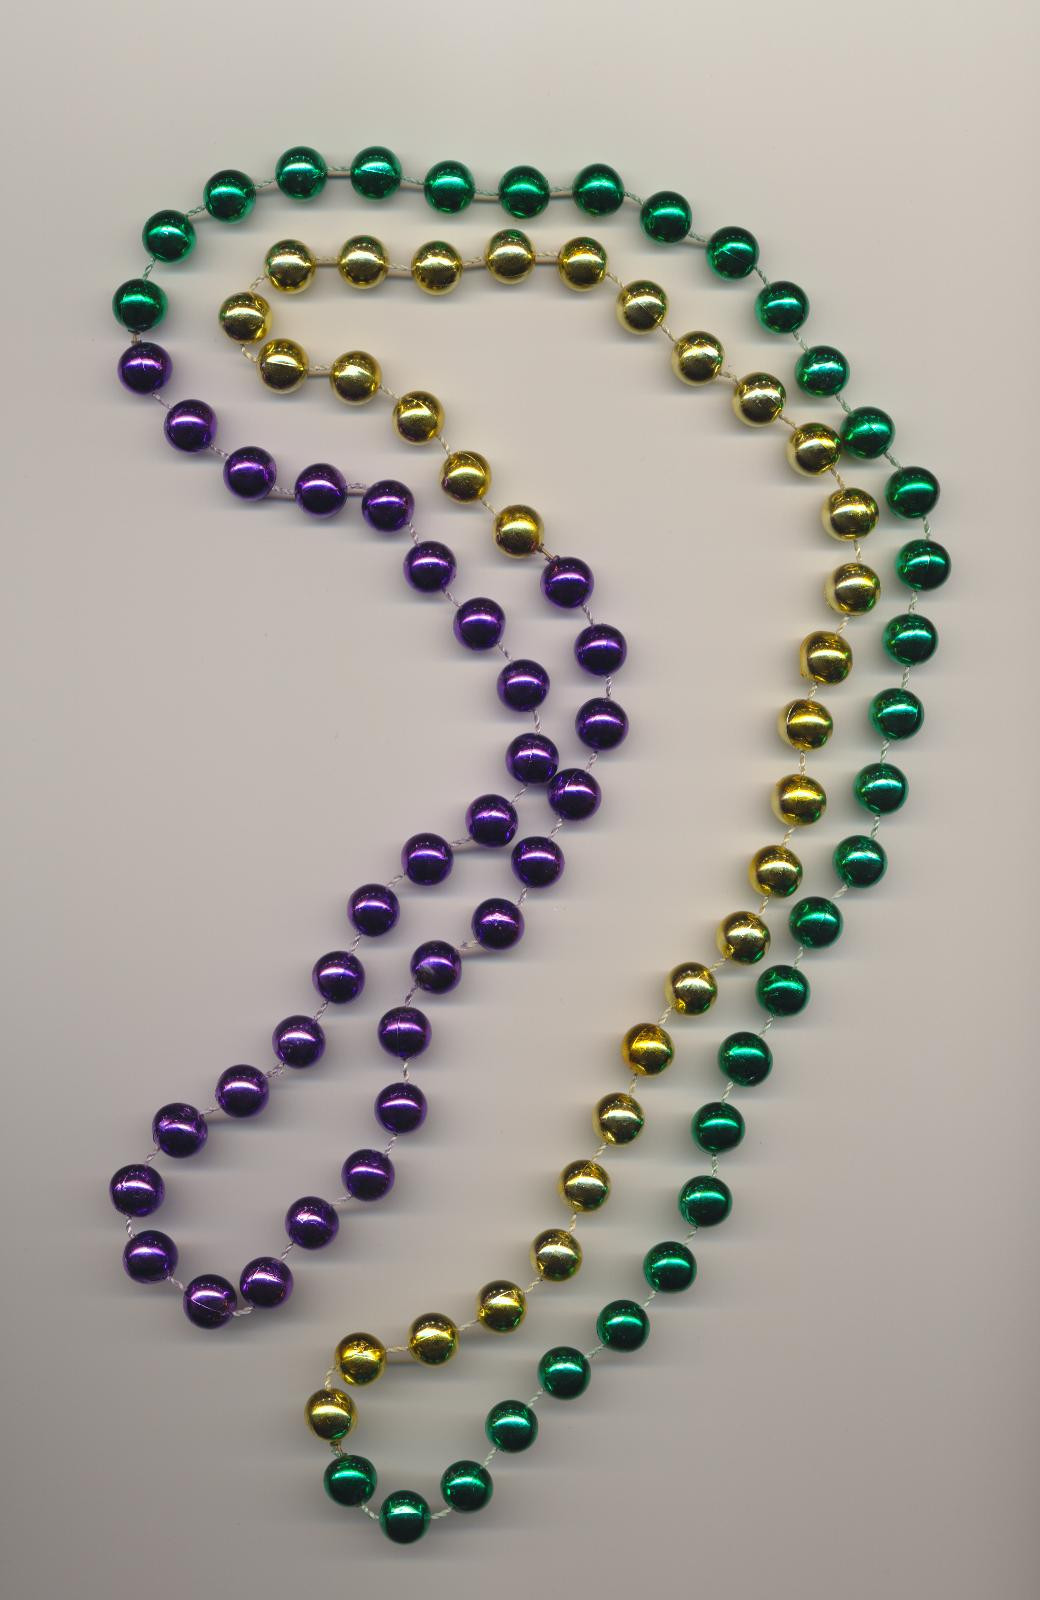 Plastic Bead Necklaces
 Plastic imitation bead necklace in the traditional Mardi